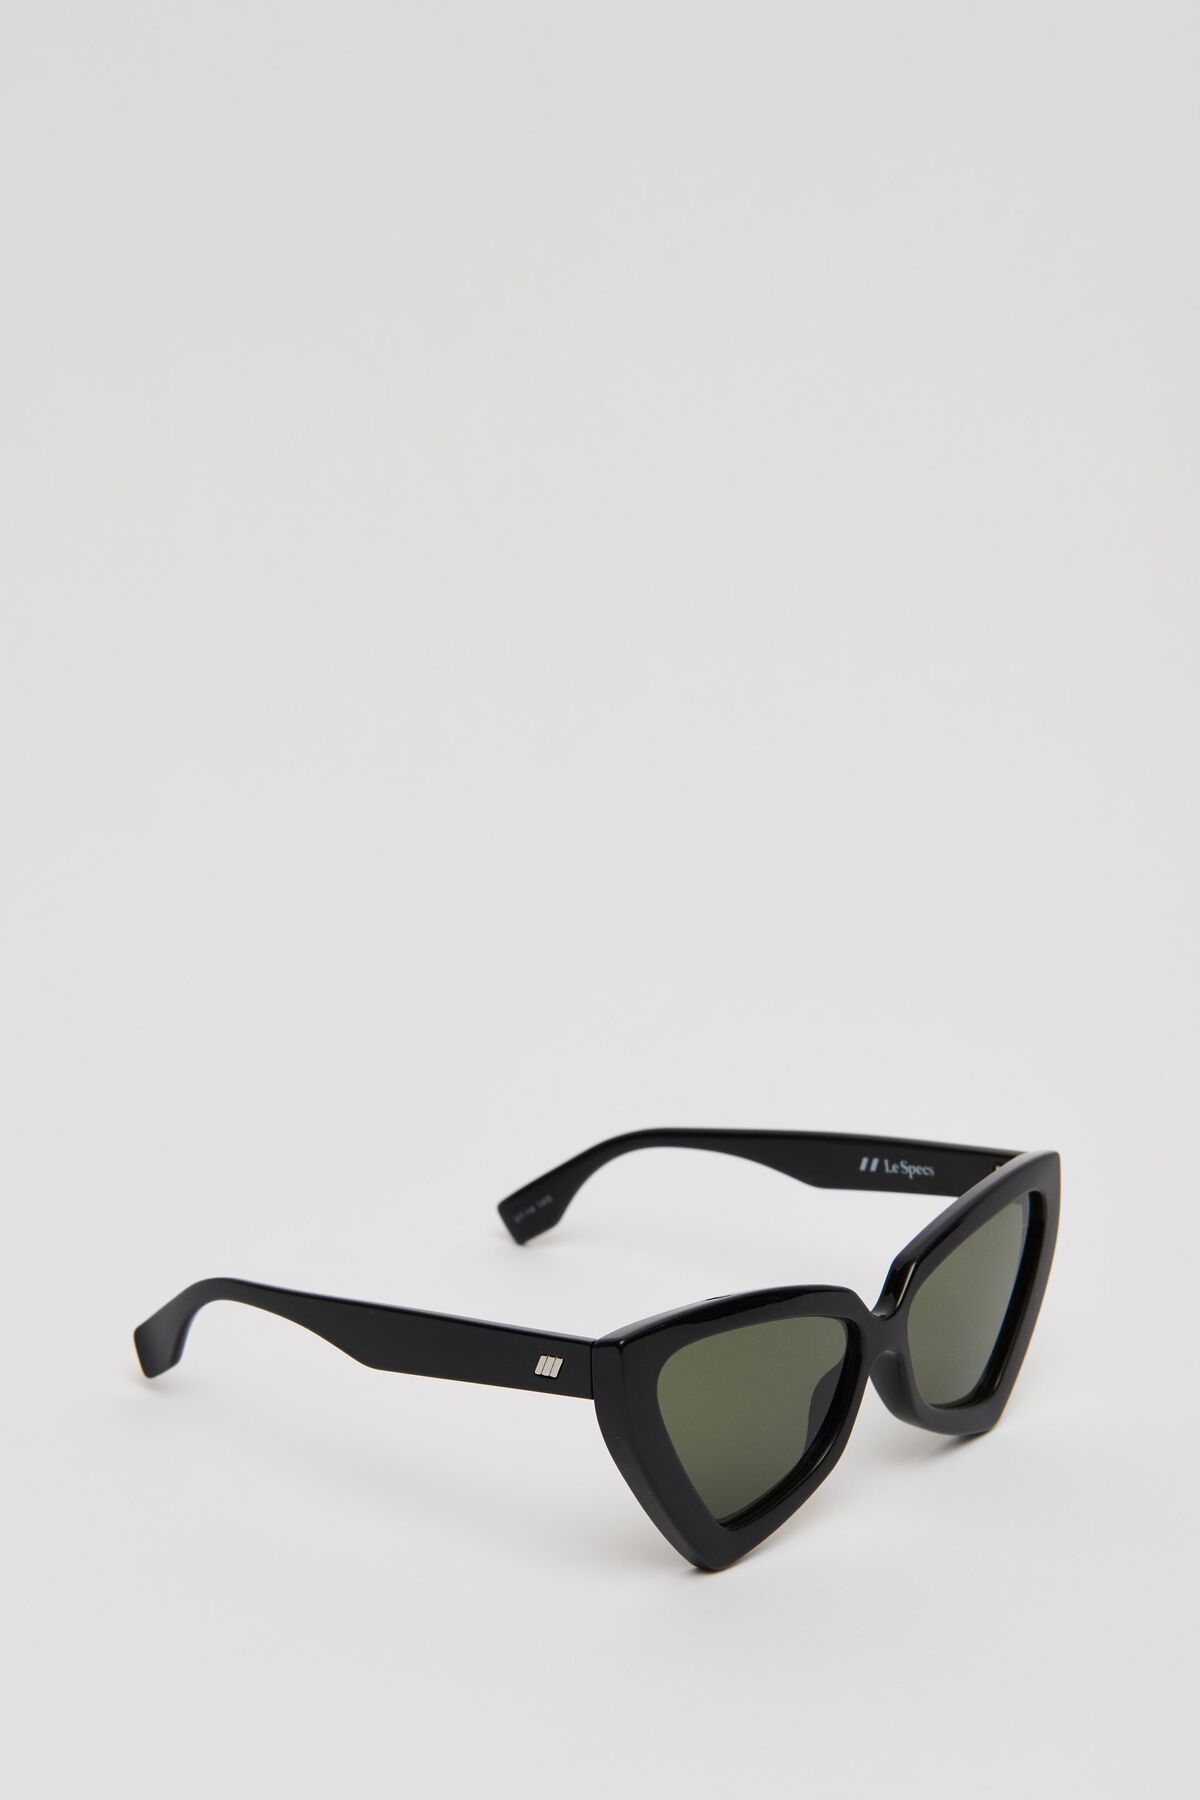 Dynamite LE SPECS | Rinky Dink Sunglasses. 5